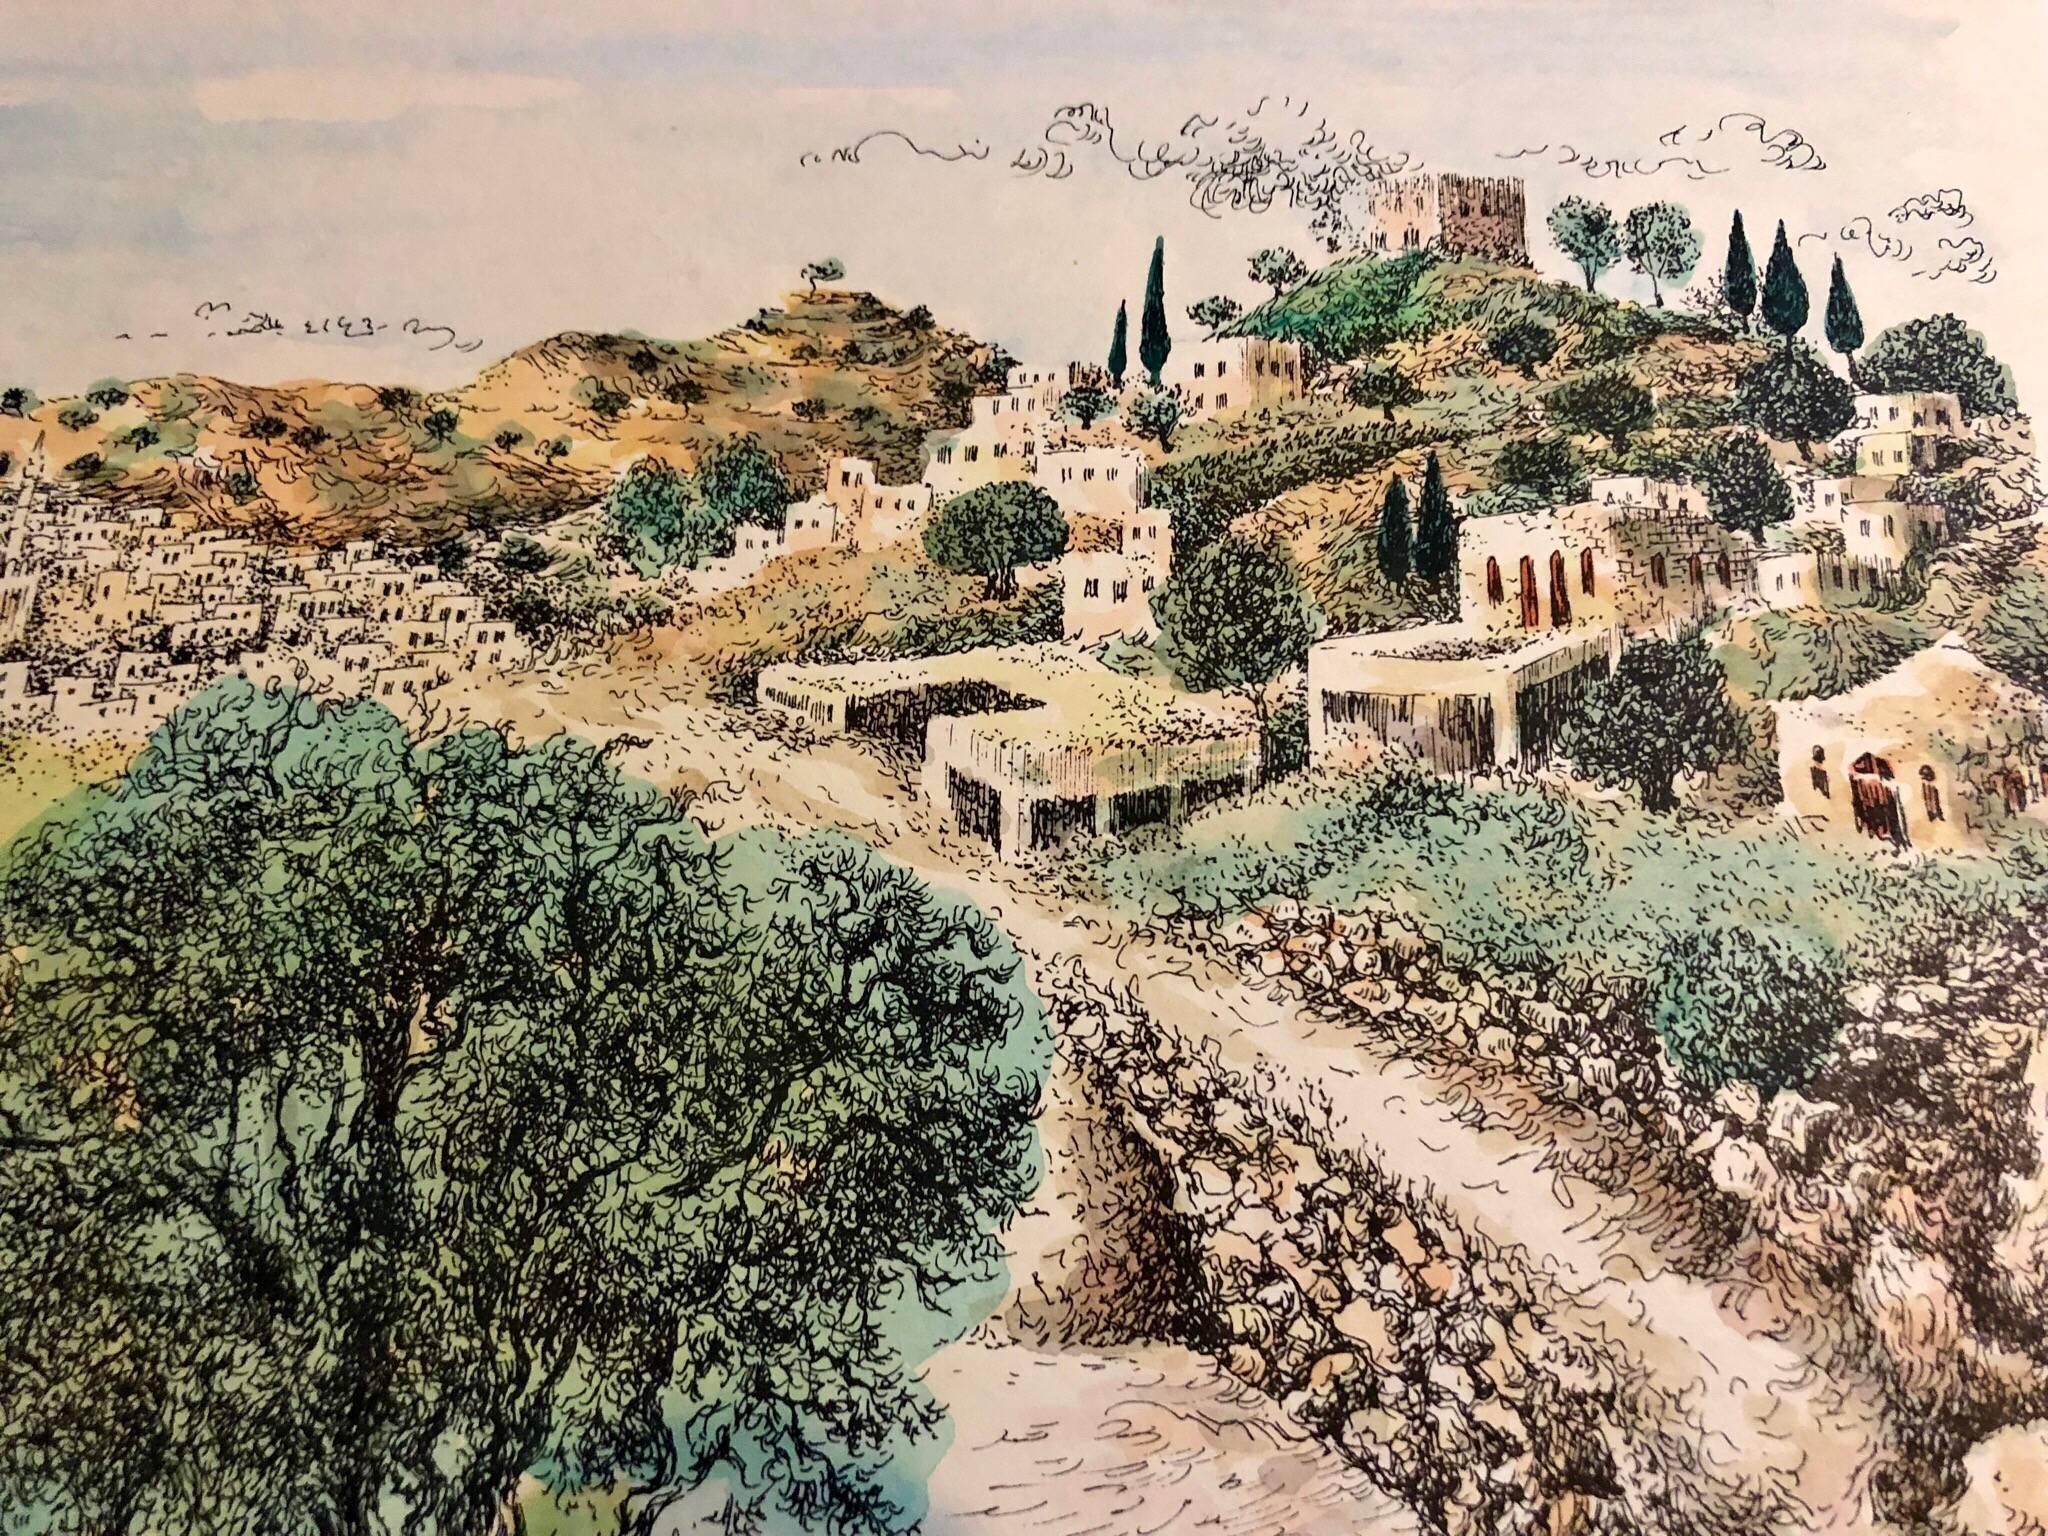 Baruch Nachshon, was born in Mandatory Palestine in 1939, in the city of Haifa.
Nachshon began to paint in early childhood, and developed his relationship to art and to artists throughout his youth. During his military service Nachshon herded flocks